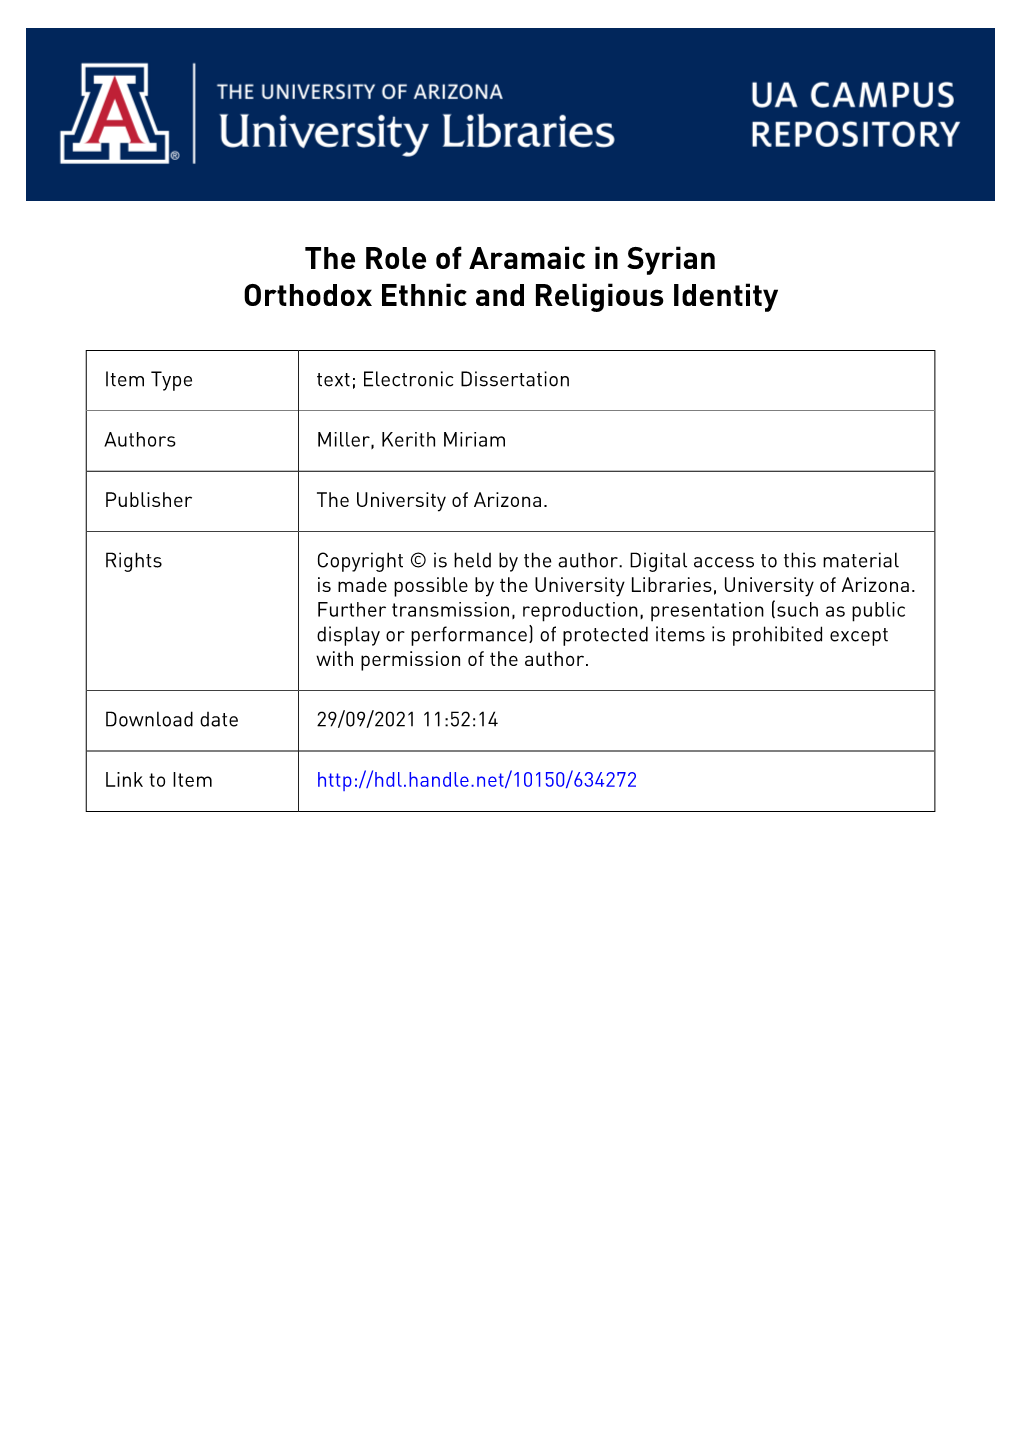 The Role of Aramaic in Syrian Orthodox Ethnic and Religious Identity